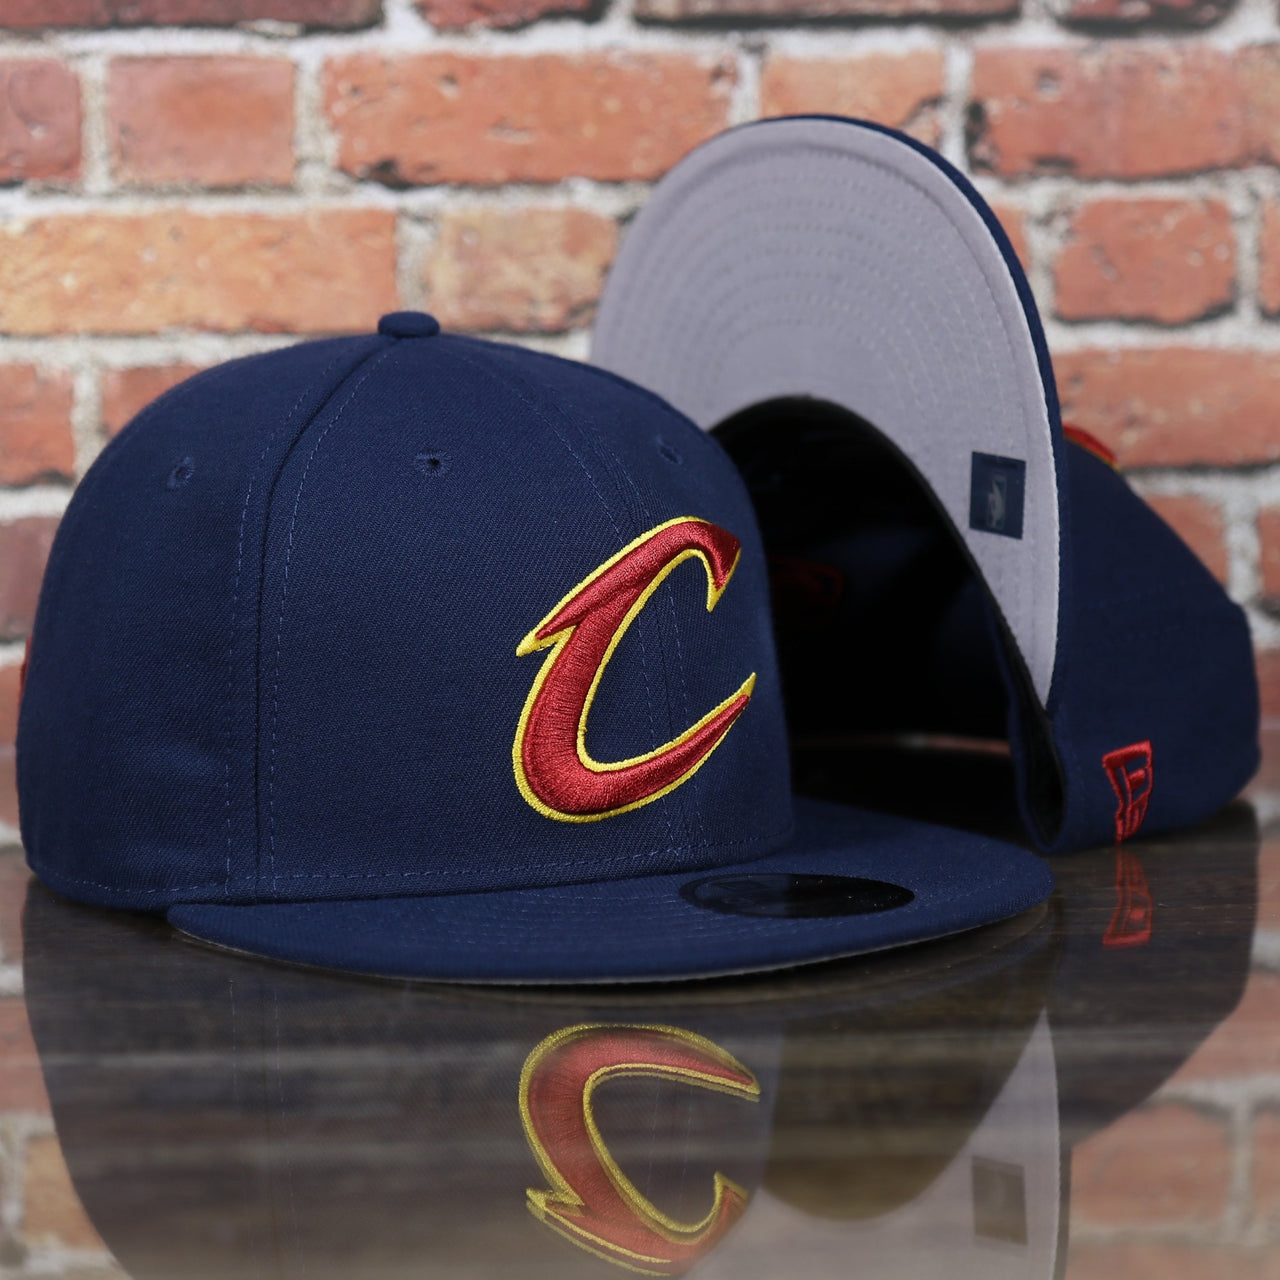 Cleveland Cavaliers Classic Navy Blue Snapback Hat